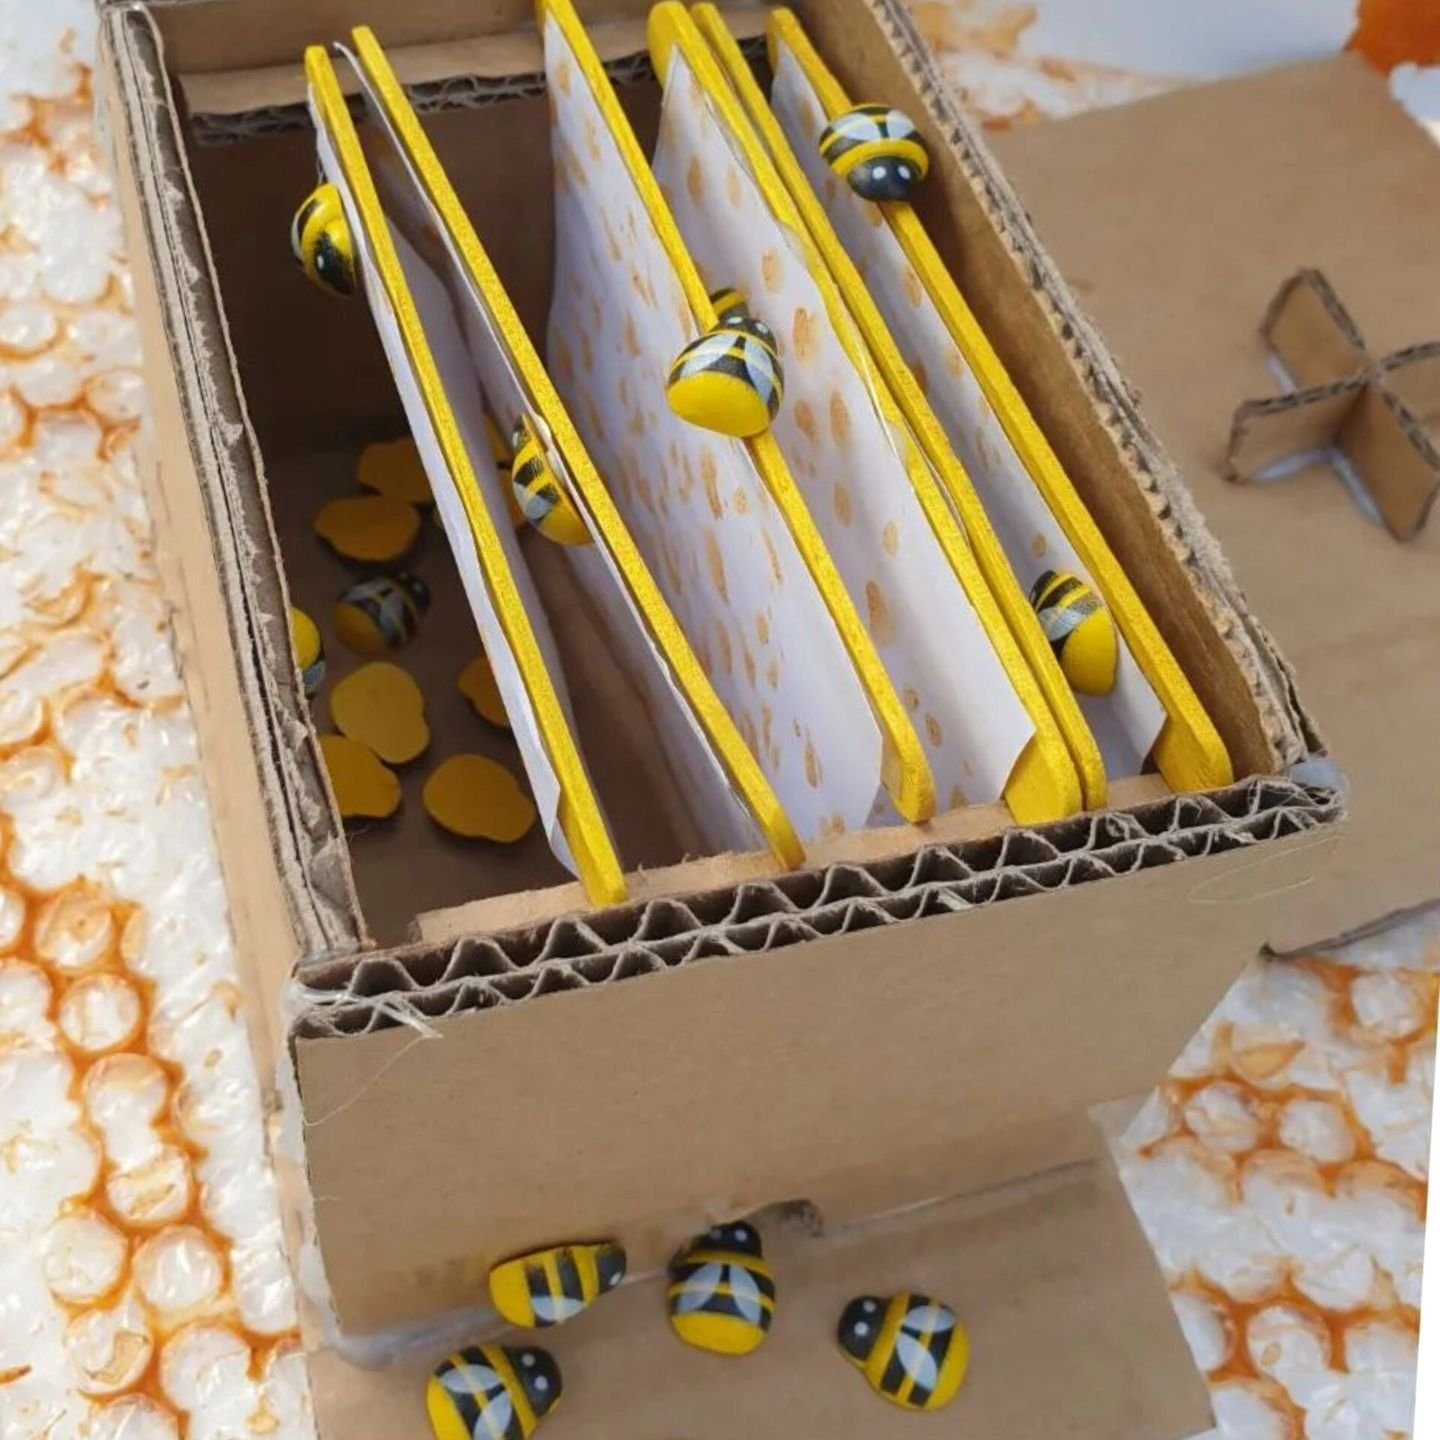 🌼 Are you gearing up for Bee Day on 20th May? 🐝 At Clever Bugs, we believe in educating kids through play, and learning about bees is a popular theme! 

Bees are vital to our ecosystem, and understanding their role can spark a lifelong appreciation